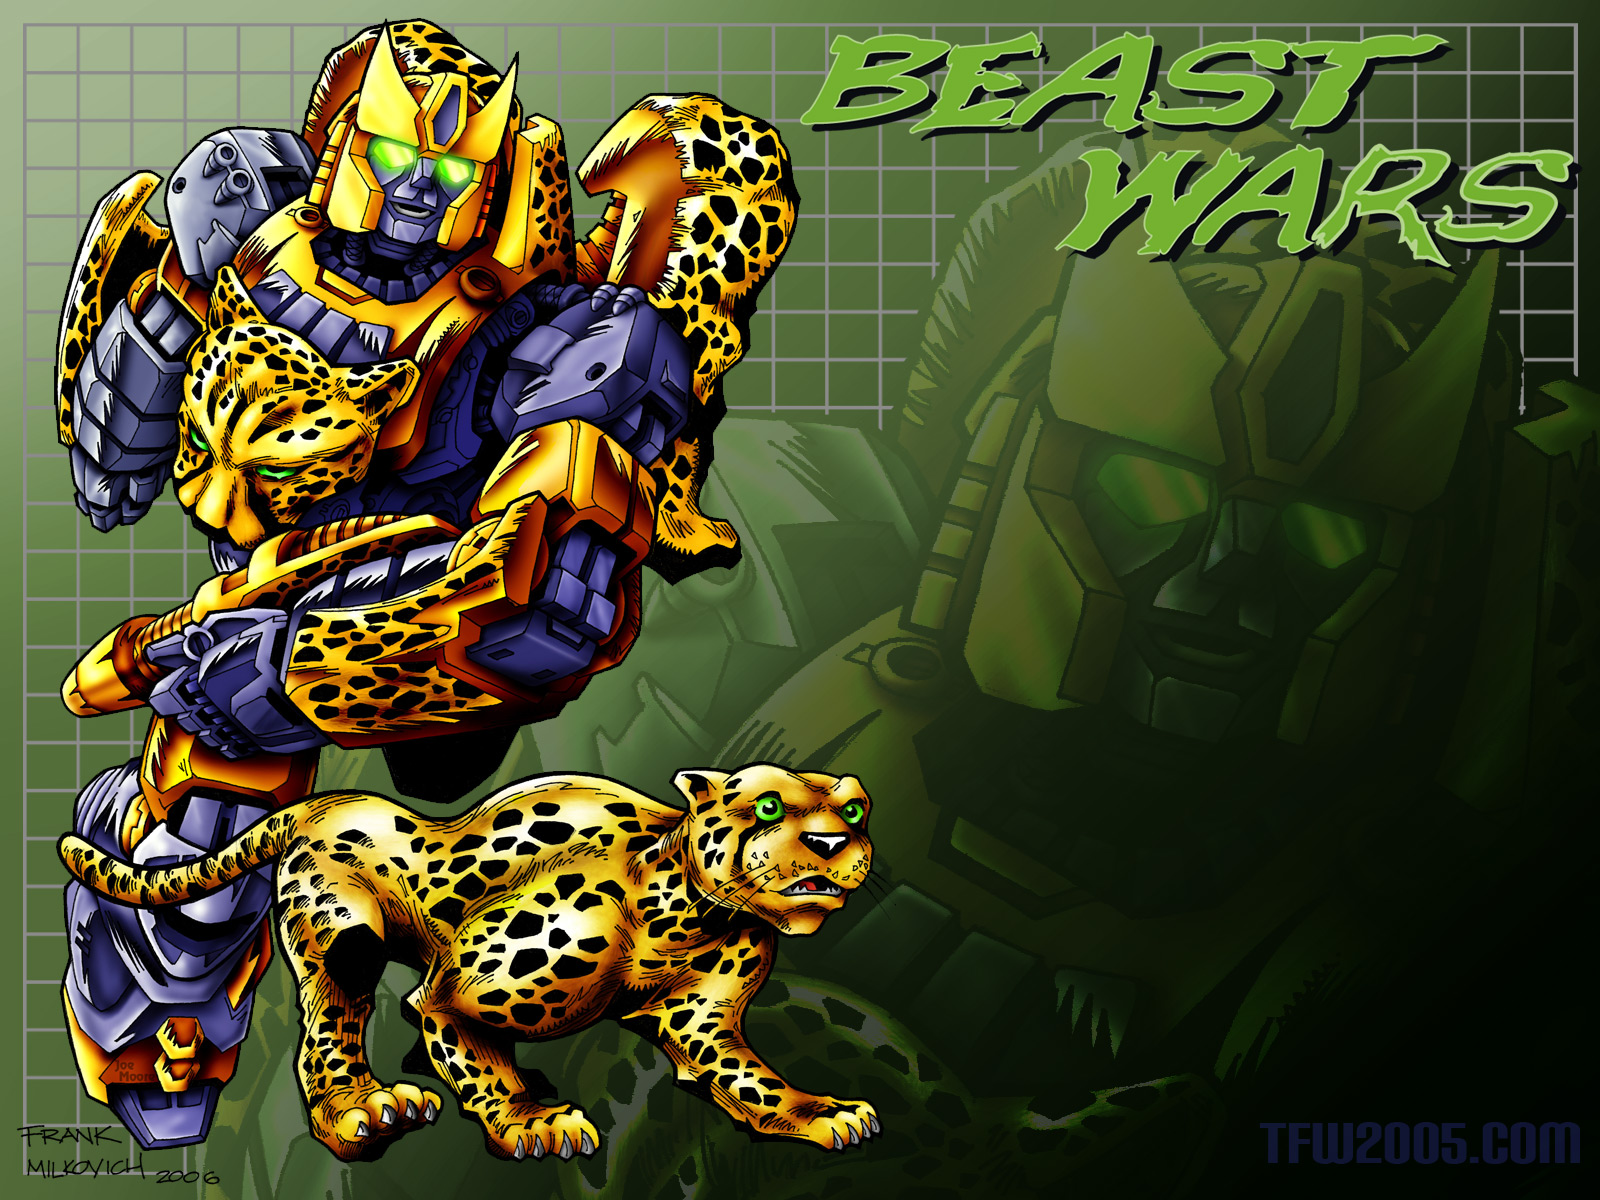  Transformers: Beast Wars HD Wallpapers  Backgrounds  Wallpaper Abyss